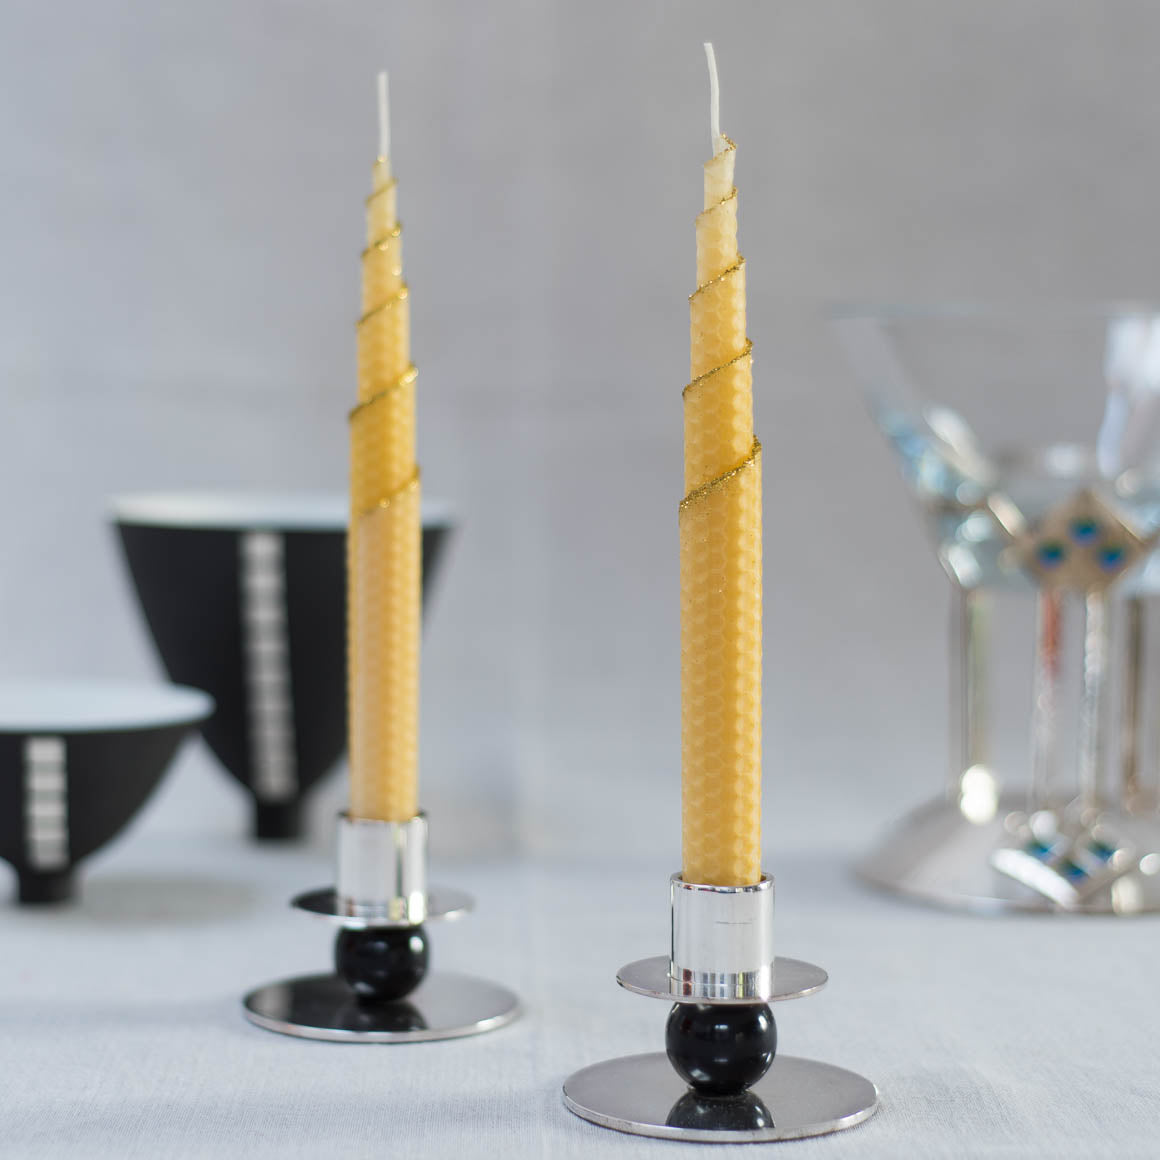 beeswax dinner candle pair, handrolled with fine glittered spiral edge